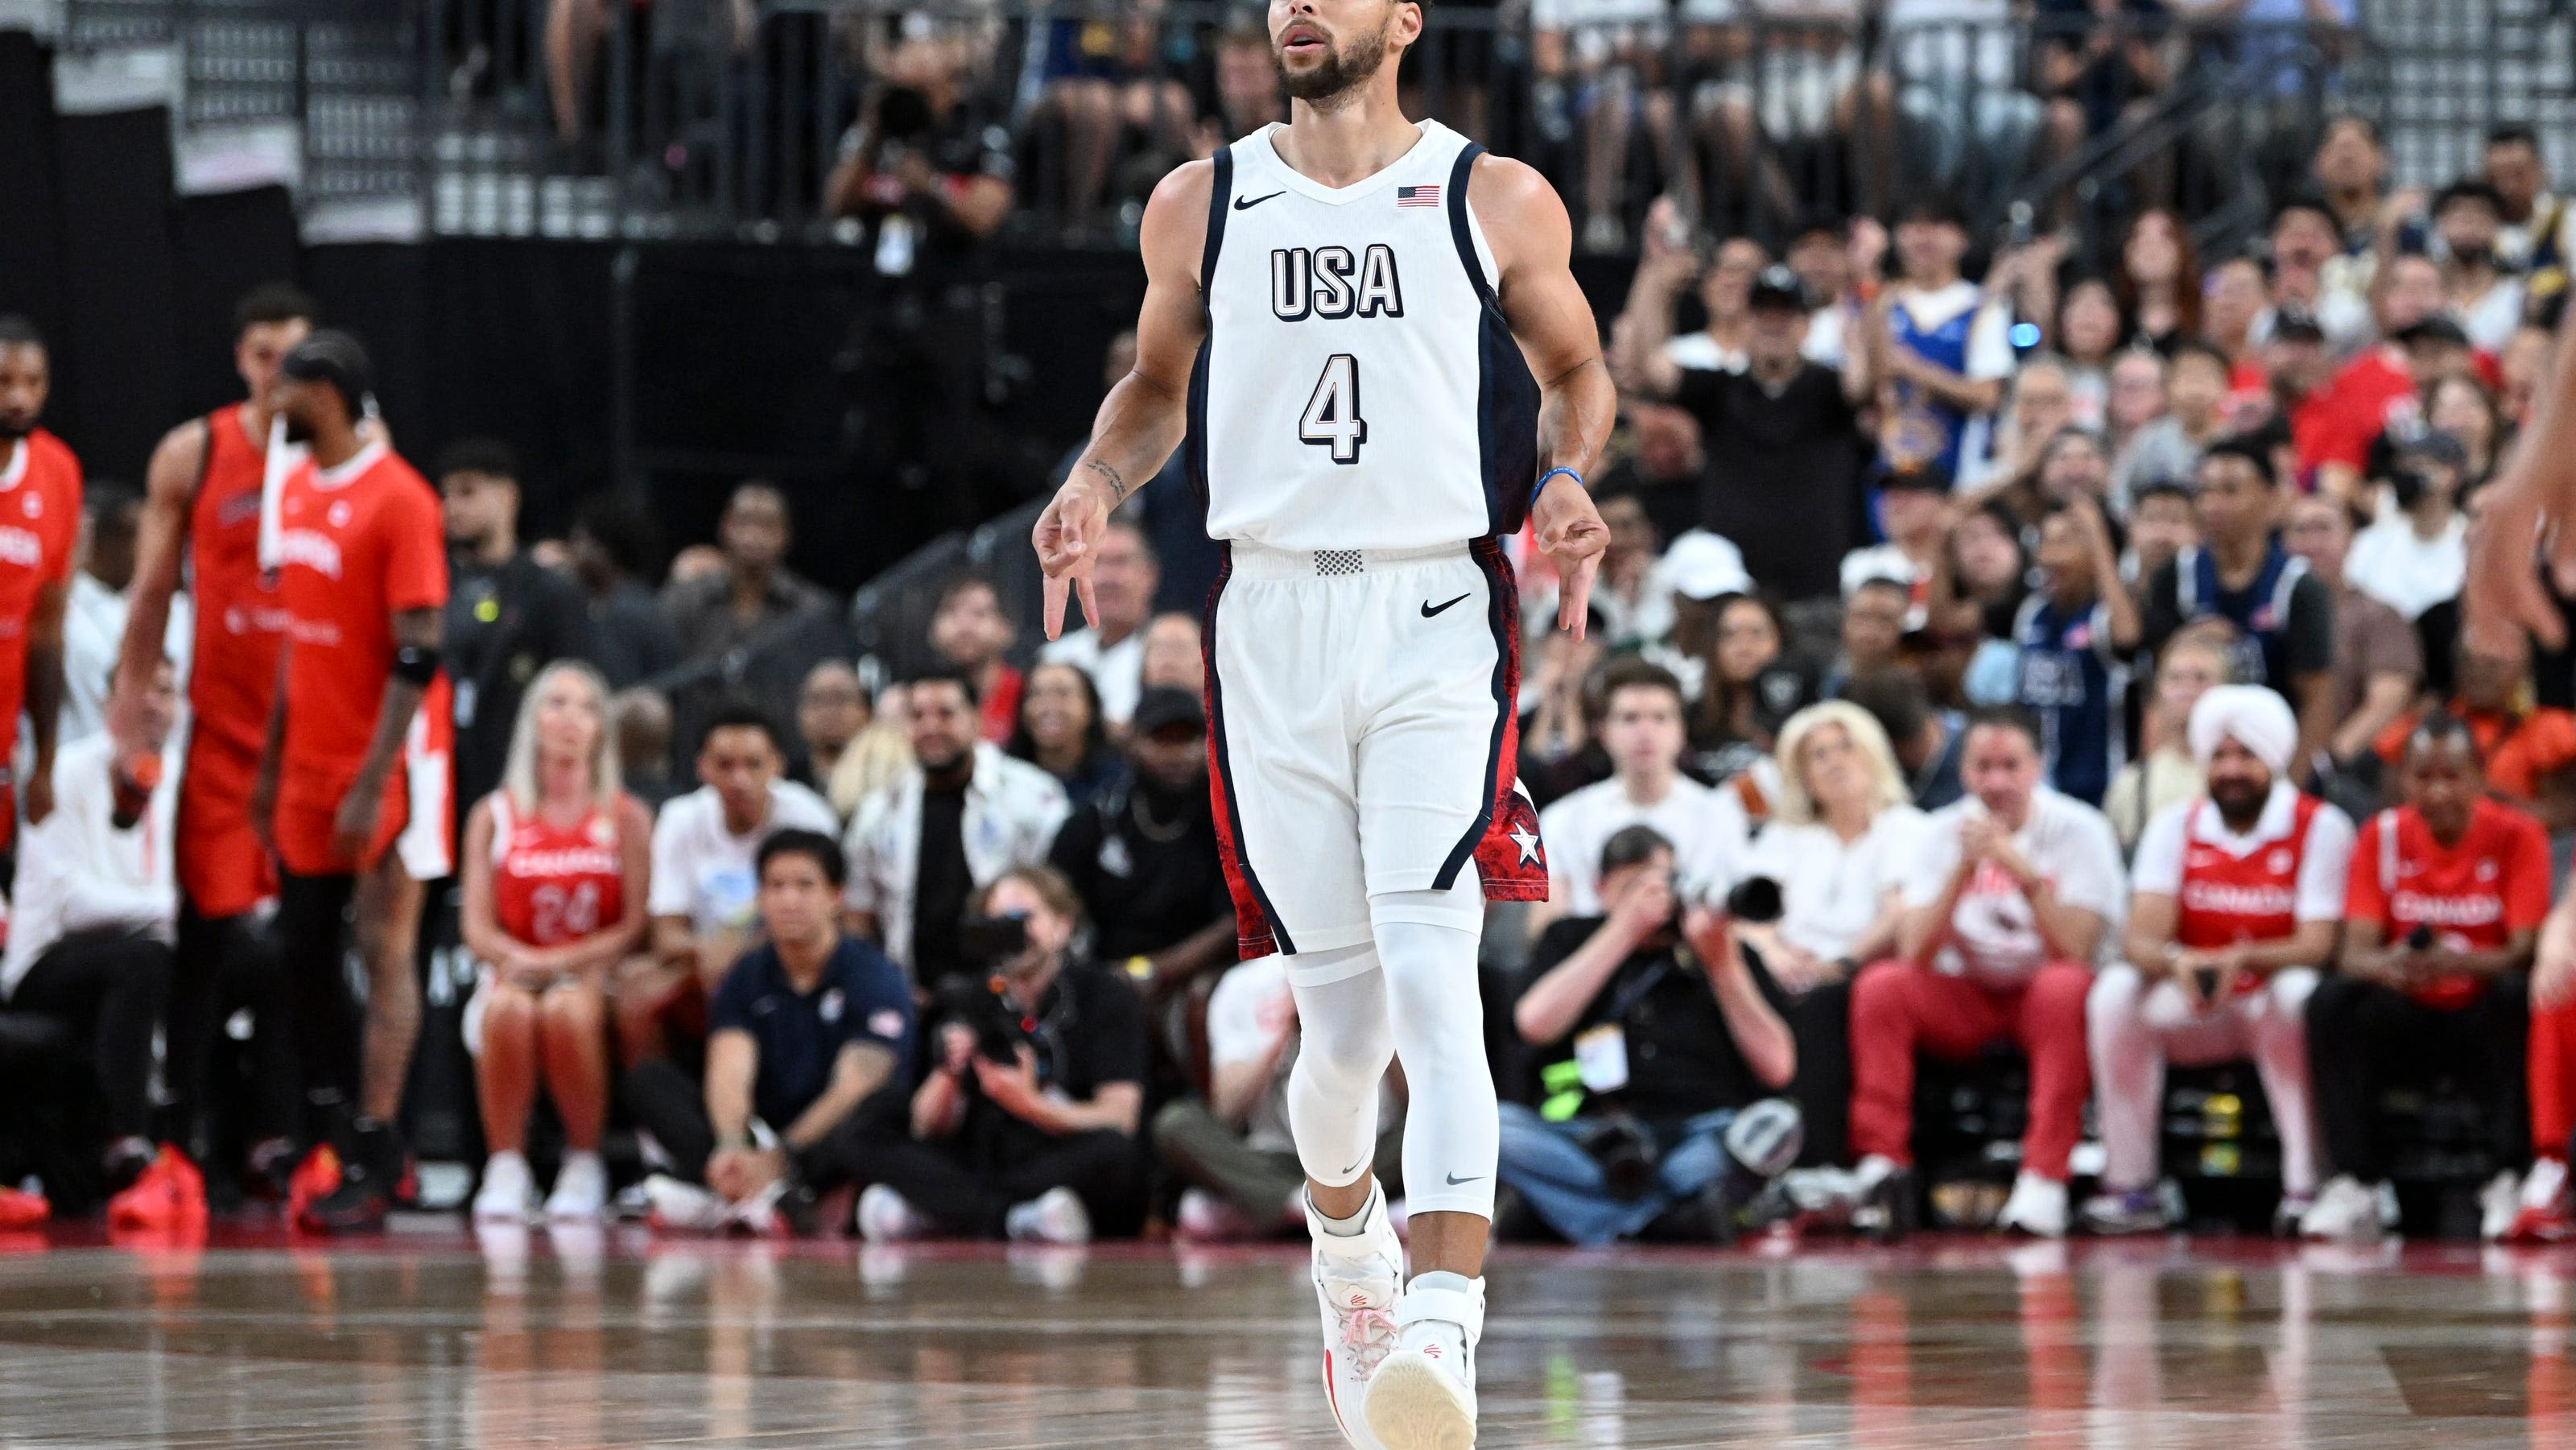 USA vs Germany score updates: TV channel, streaming for USA Basketball Showcase exhibition